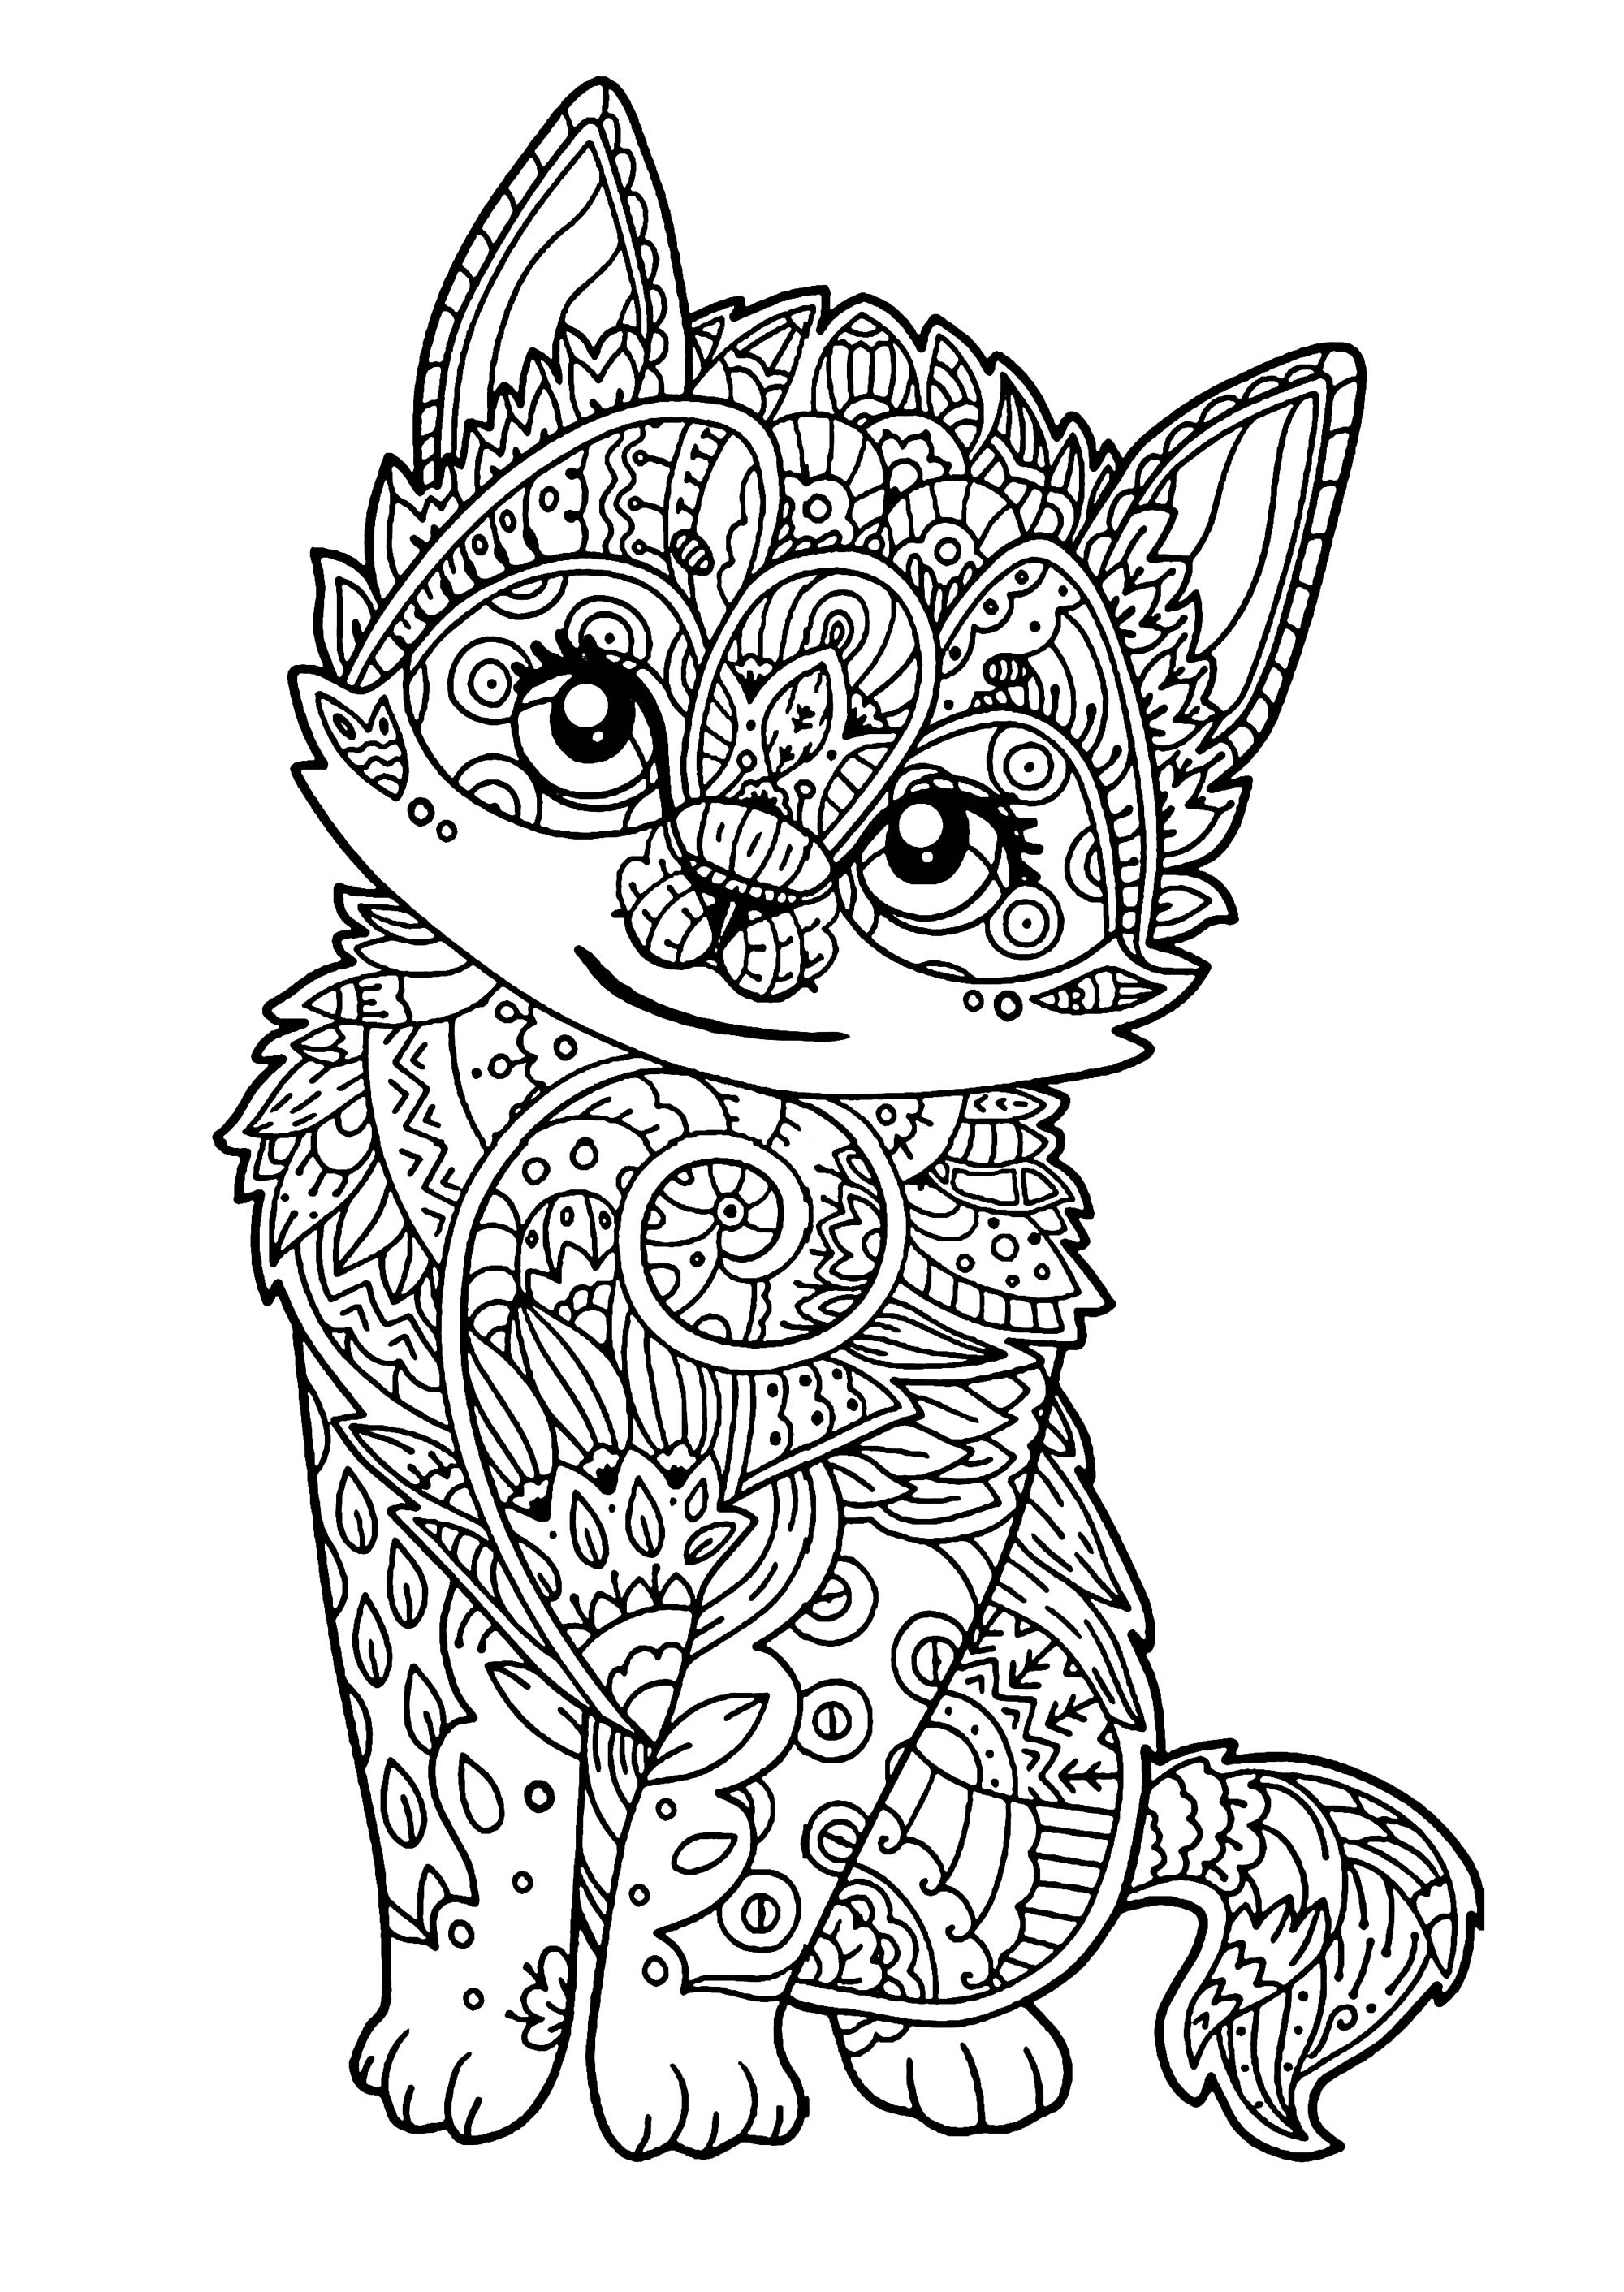 Download Cat for kids : Little kitten - Cats Kids Coloring Pages